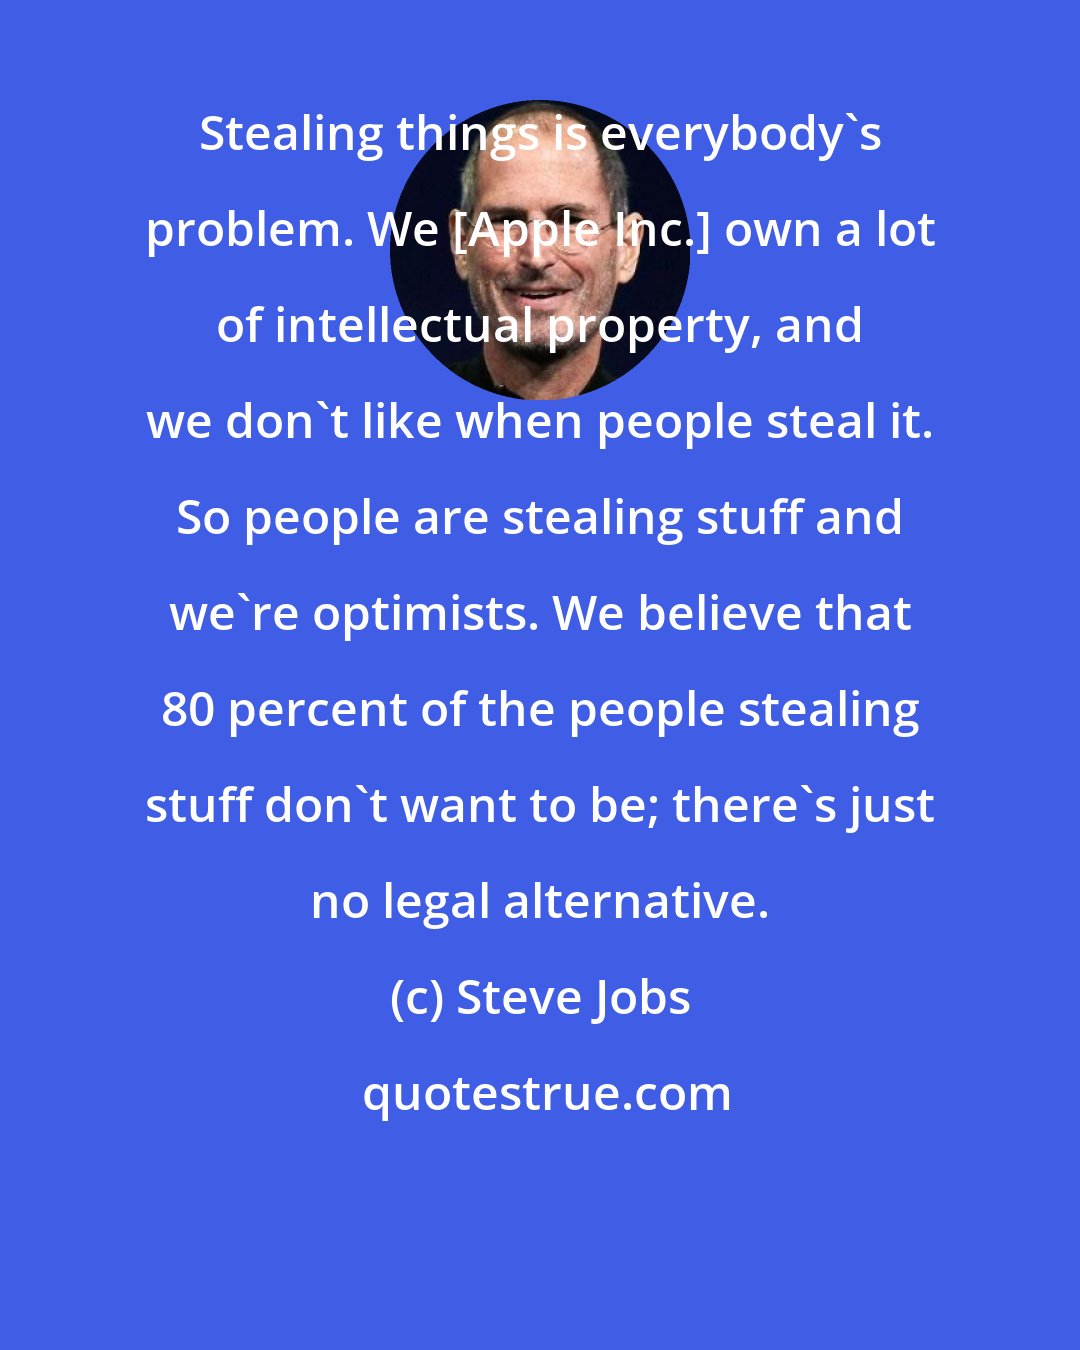 Steve Jobs: Stealing things is everybody's problem. We [Apple Inc.] own a lot of intellectual property, and we don't like when people steal it. So people are stealing stuff and we're optimists. We believe that 80 percent of the people stealing stuff don't want to be; there's just no legal alternative.